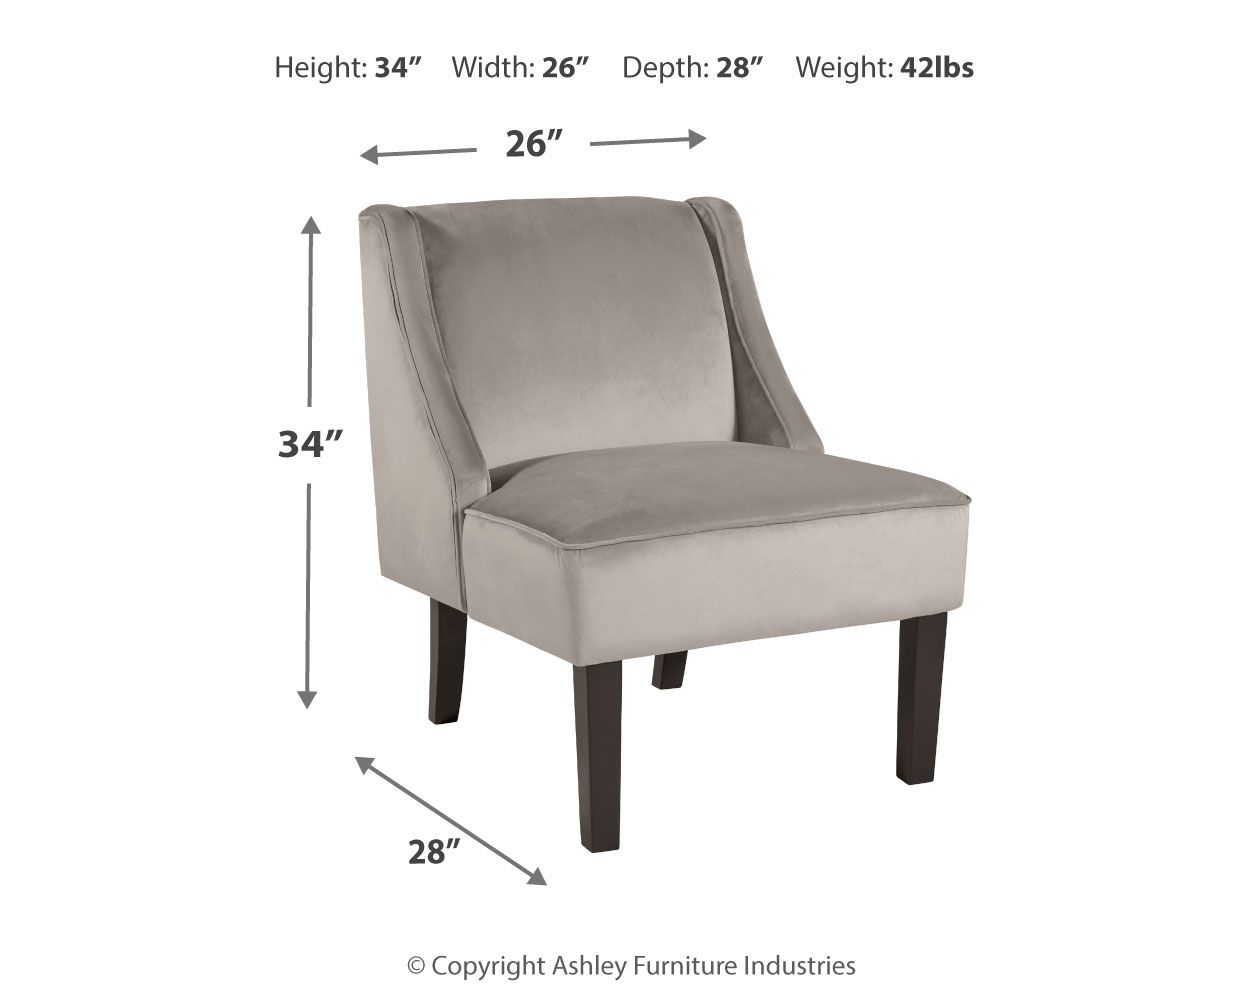 Janesley - Taupe - Accent Chair